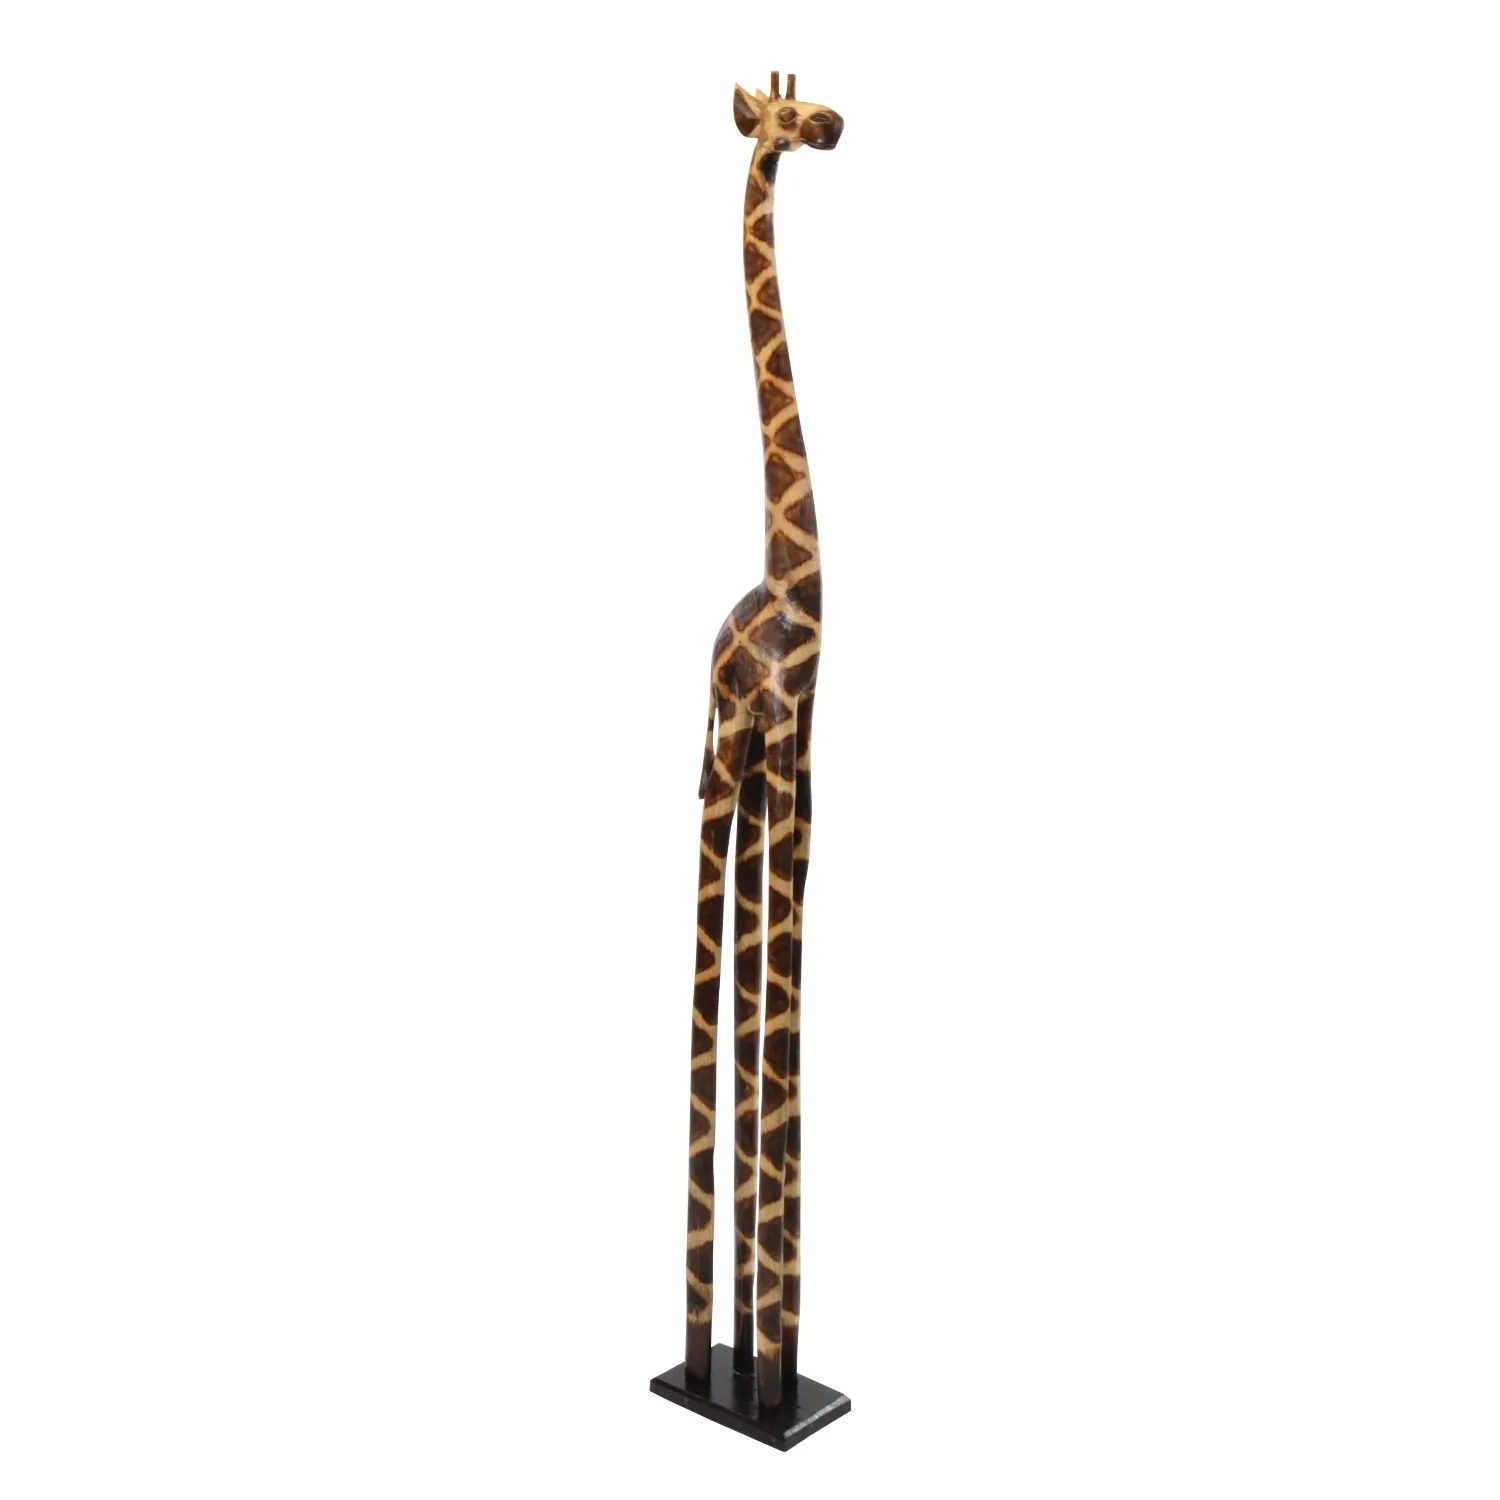 Large Wooden Hand Carved Giraffe 200cm Tall